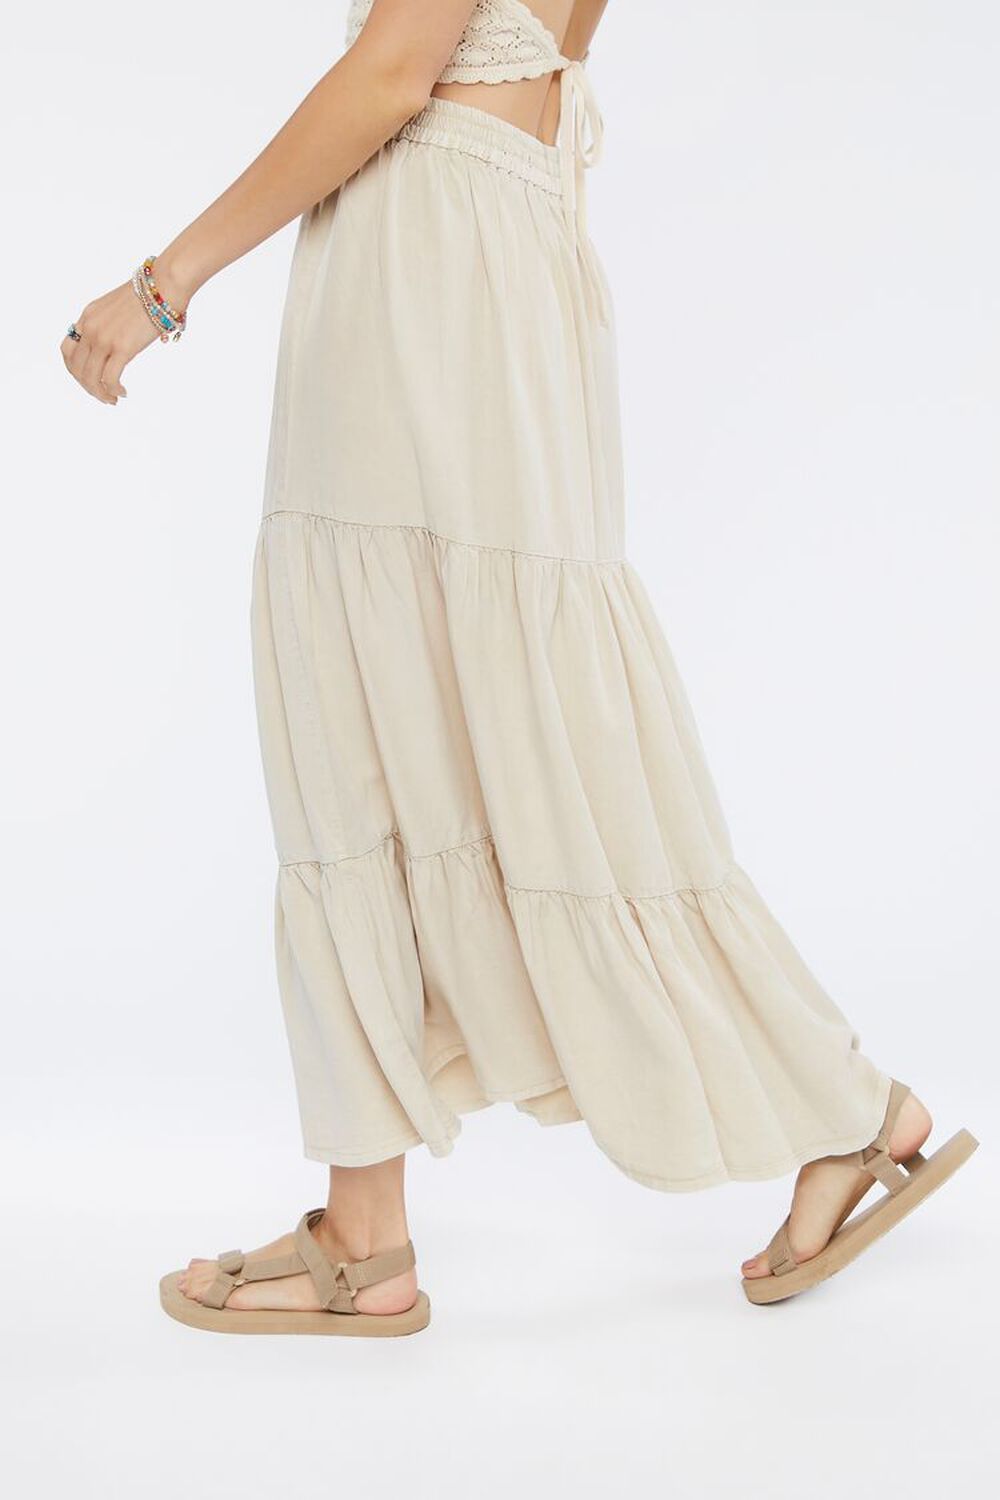 SANDSHELL Tiered High-Rise Maxi Skirt, image 3